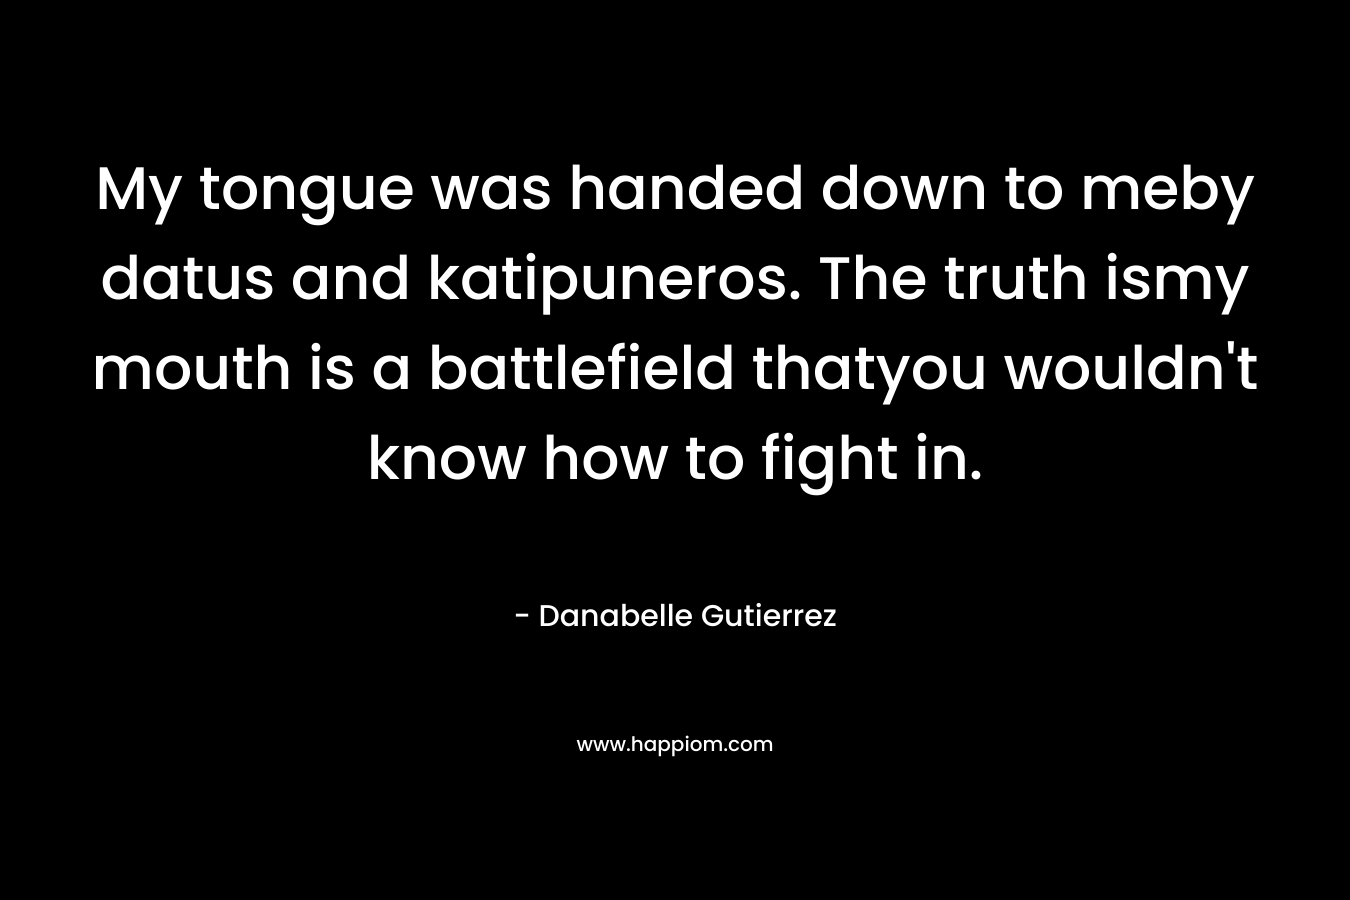 My tongue was handed down to meby datus and katipuneros. The truth ismy mouth is a battlefield thatyou wouldn’t know how to fight in. – Danabelle Gutierrez